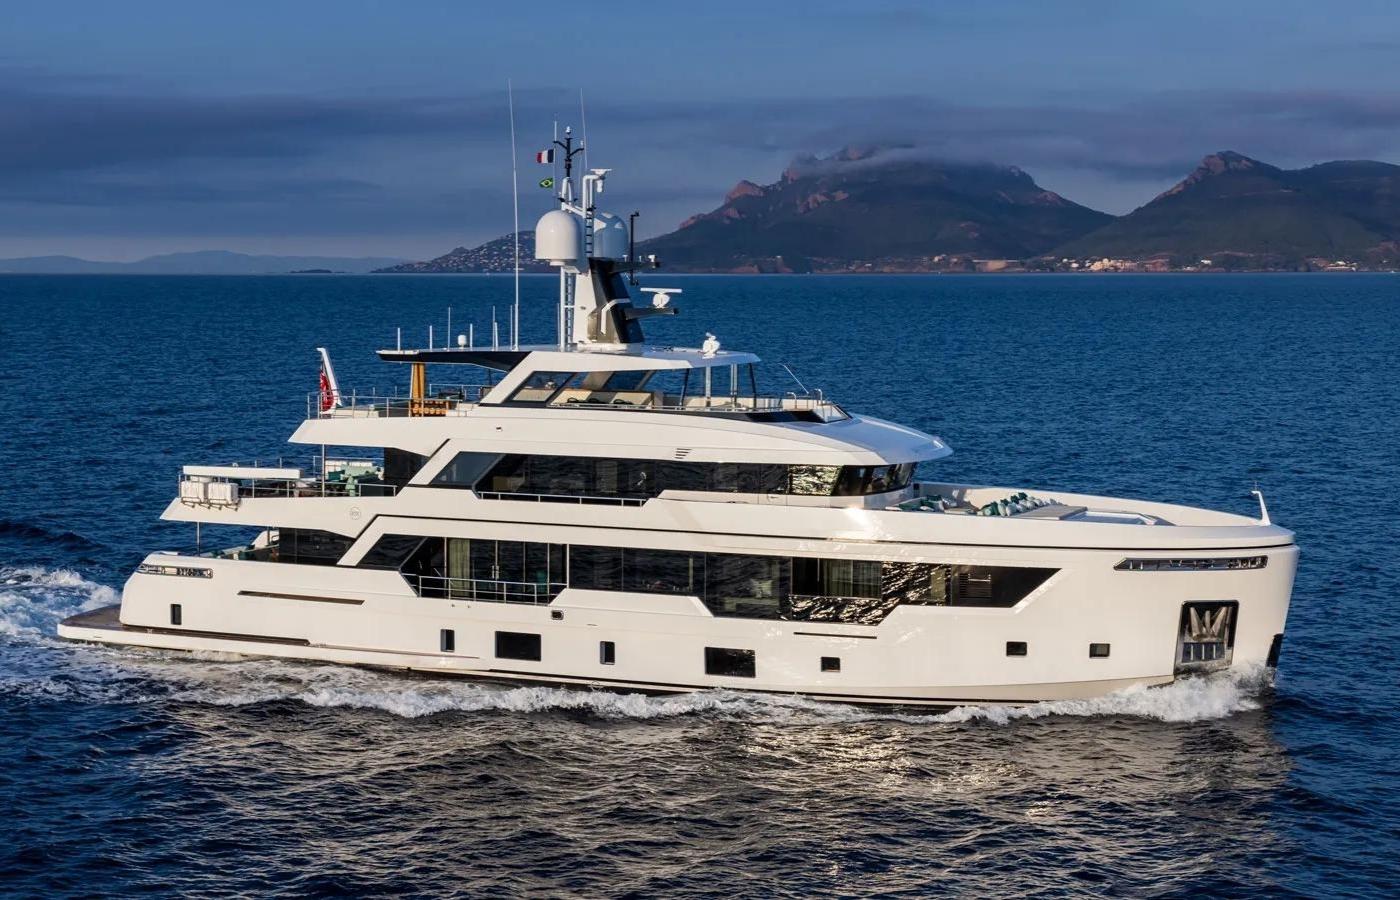 Rosetti motor yacht Emocean for sale for the first time [In the News]